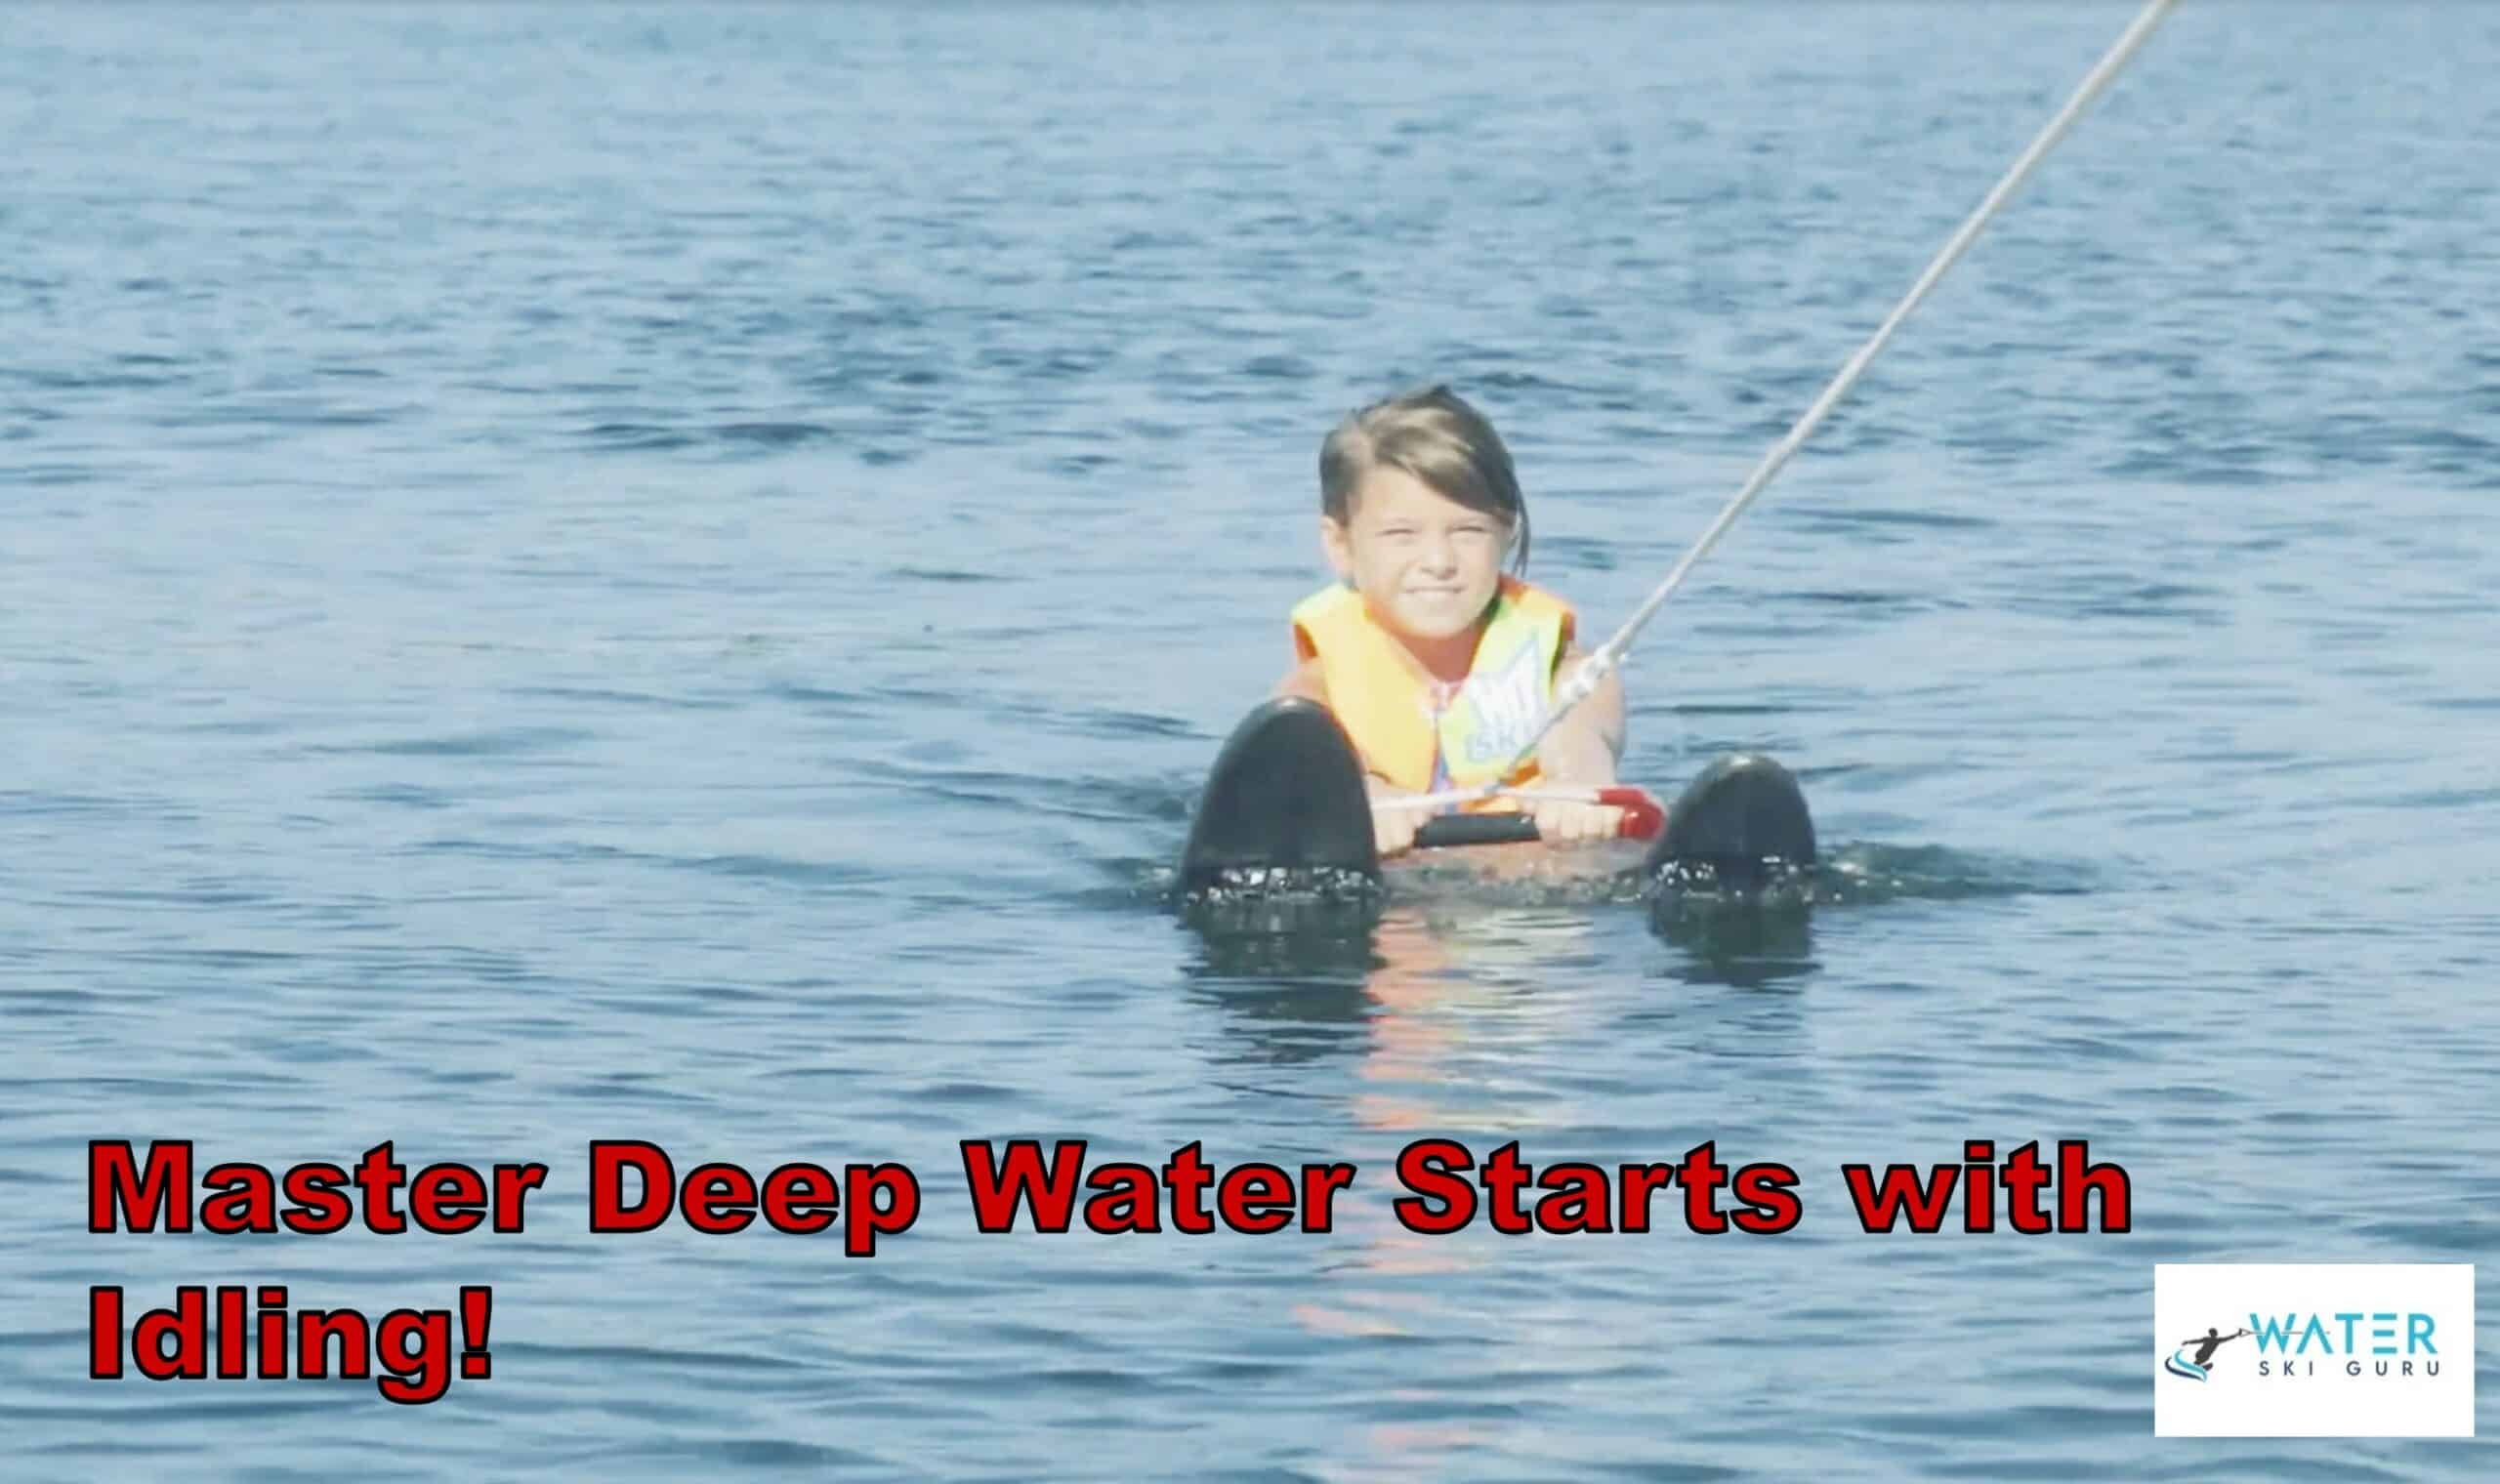 Master Deep Water Starts with Idling